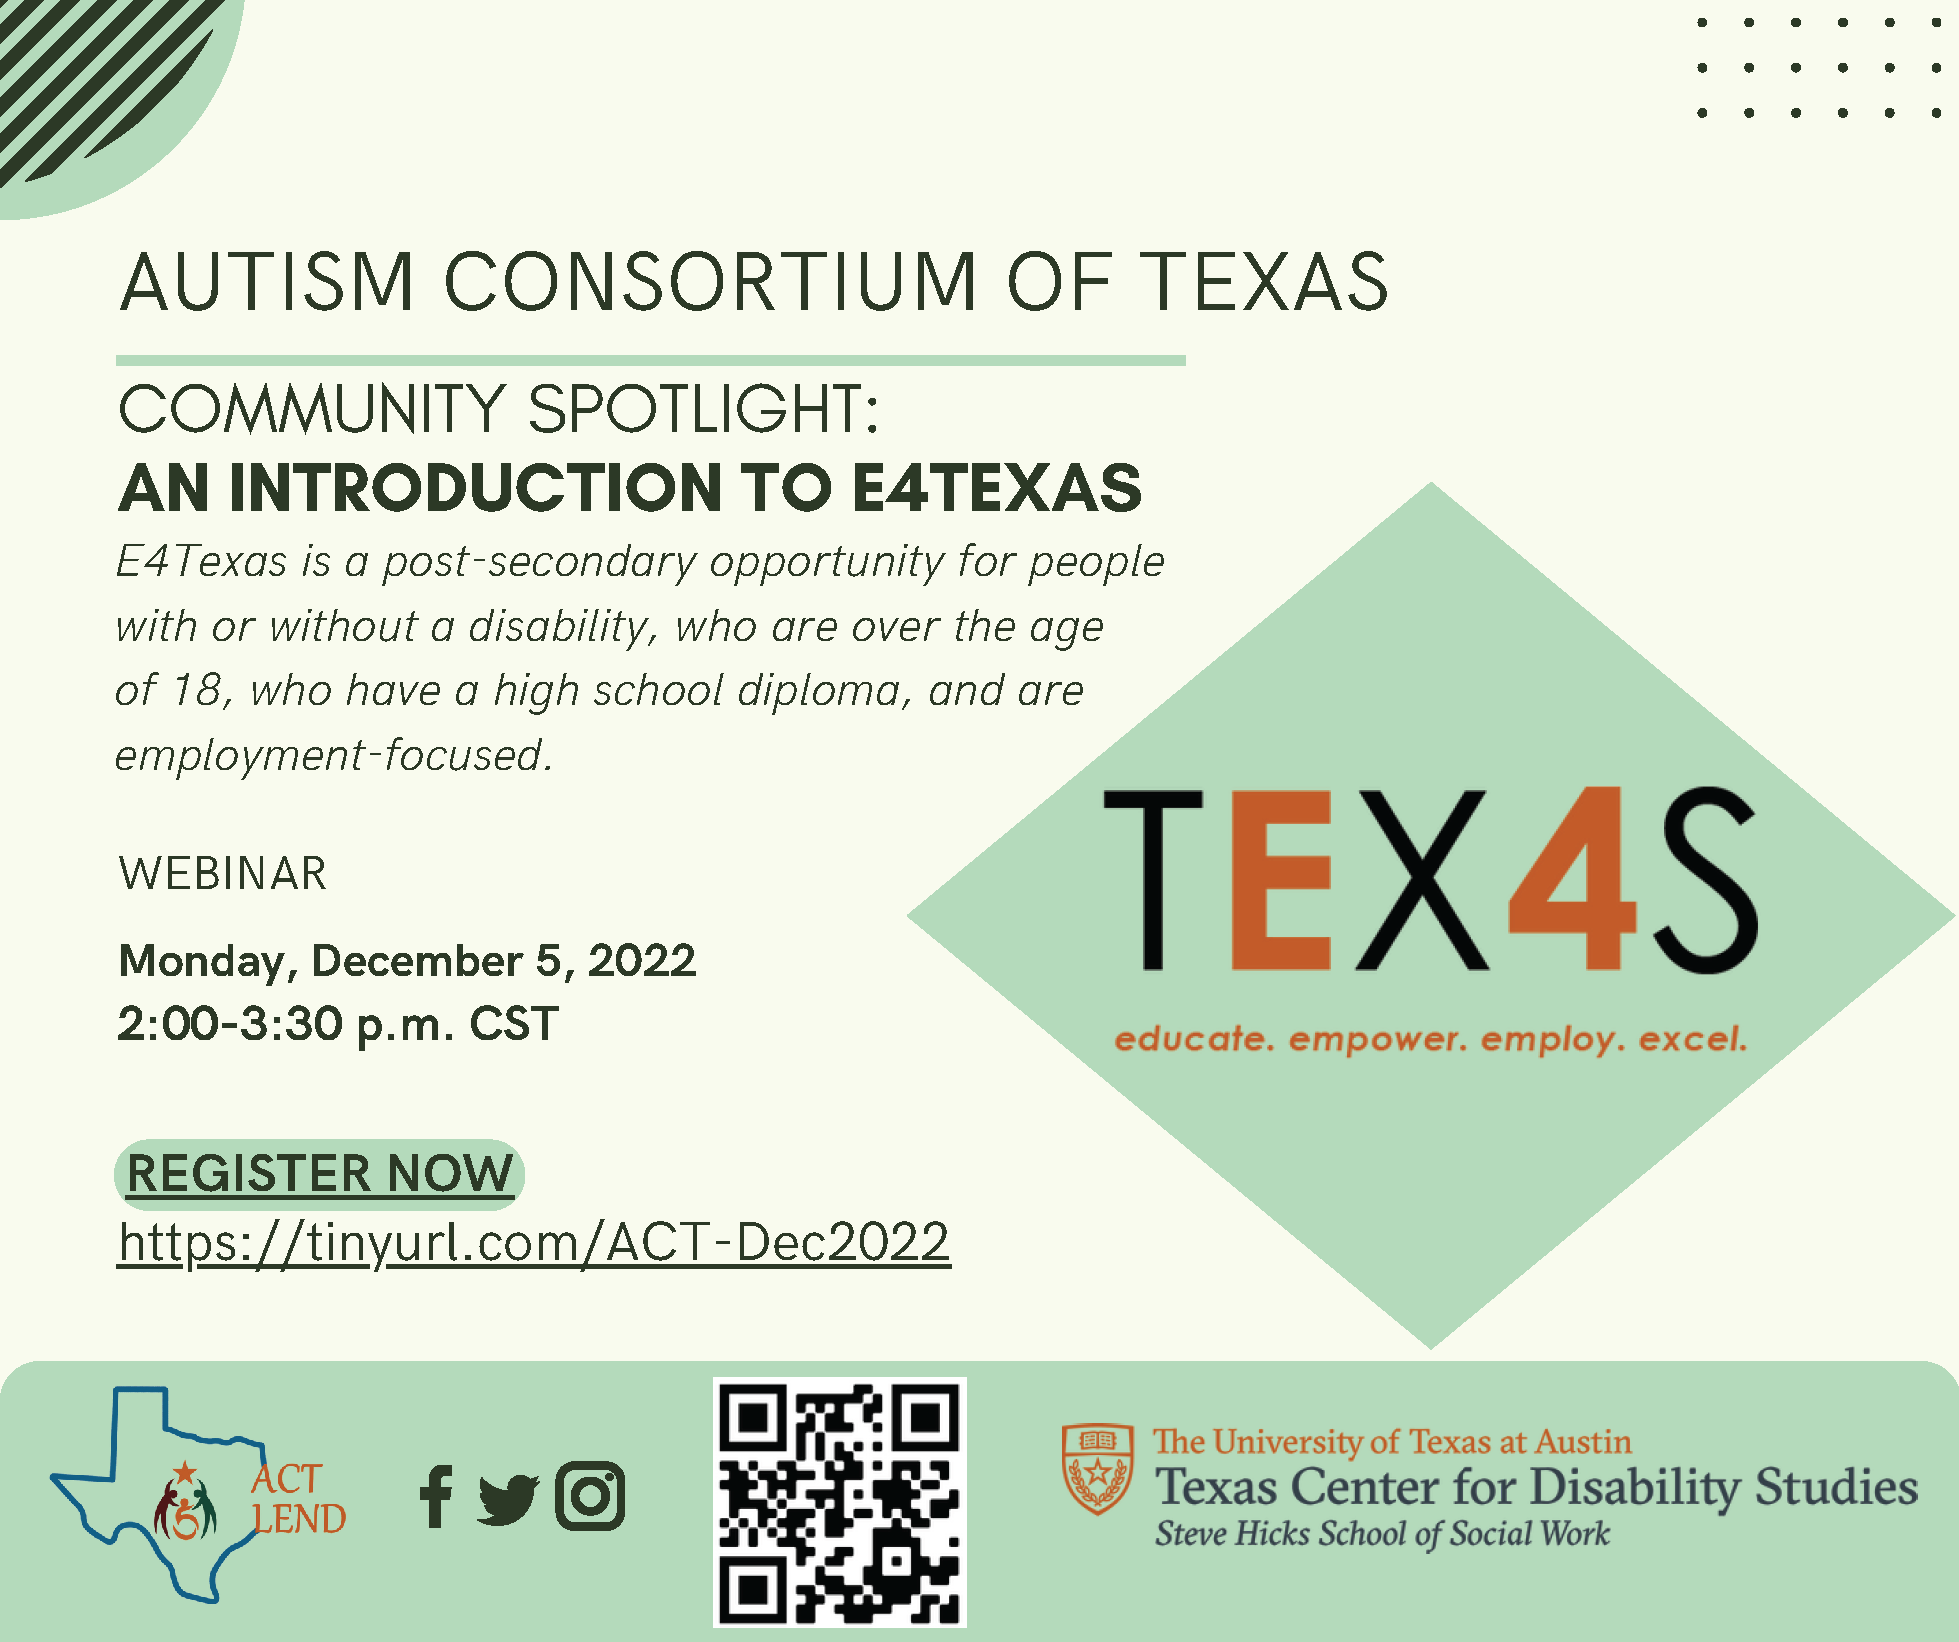 Autism Consortium of Texas December Meeting to be held on Monday, December 5, 2022 at 2:00PM